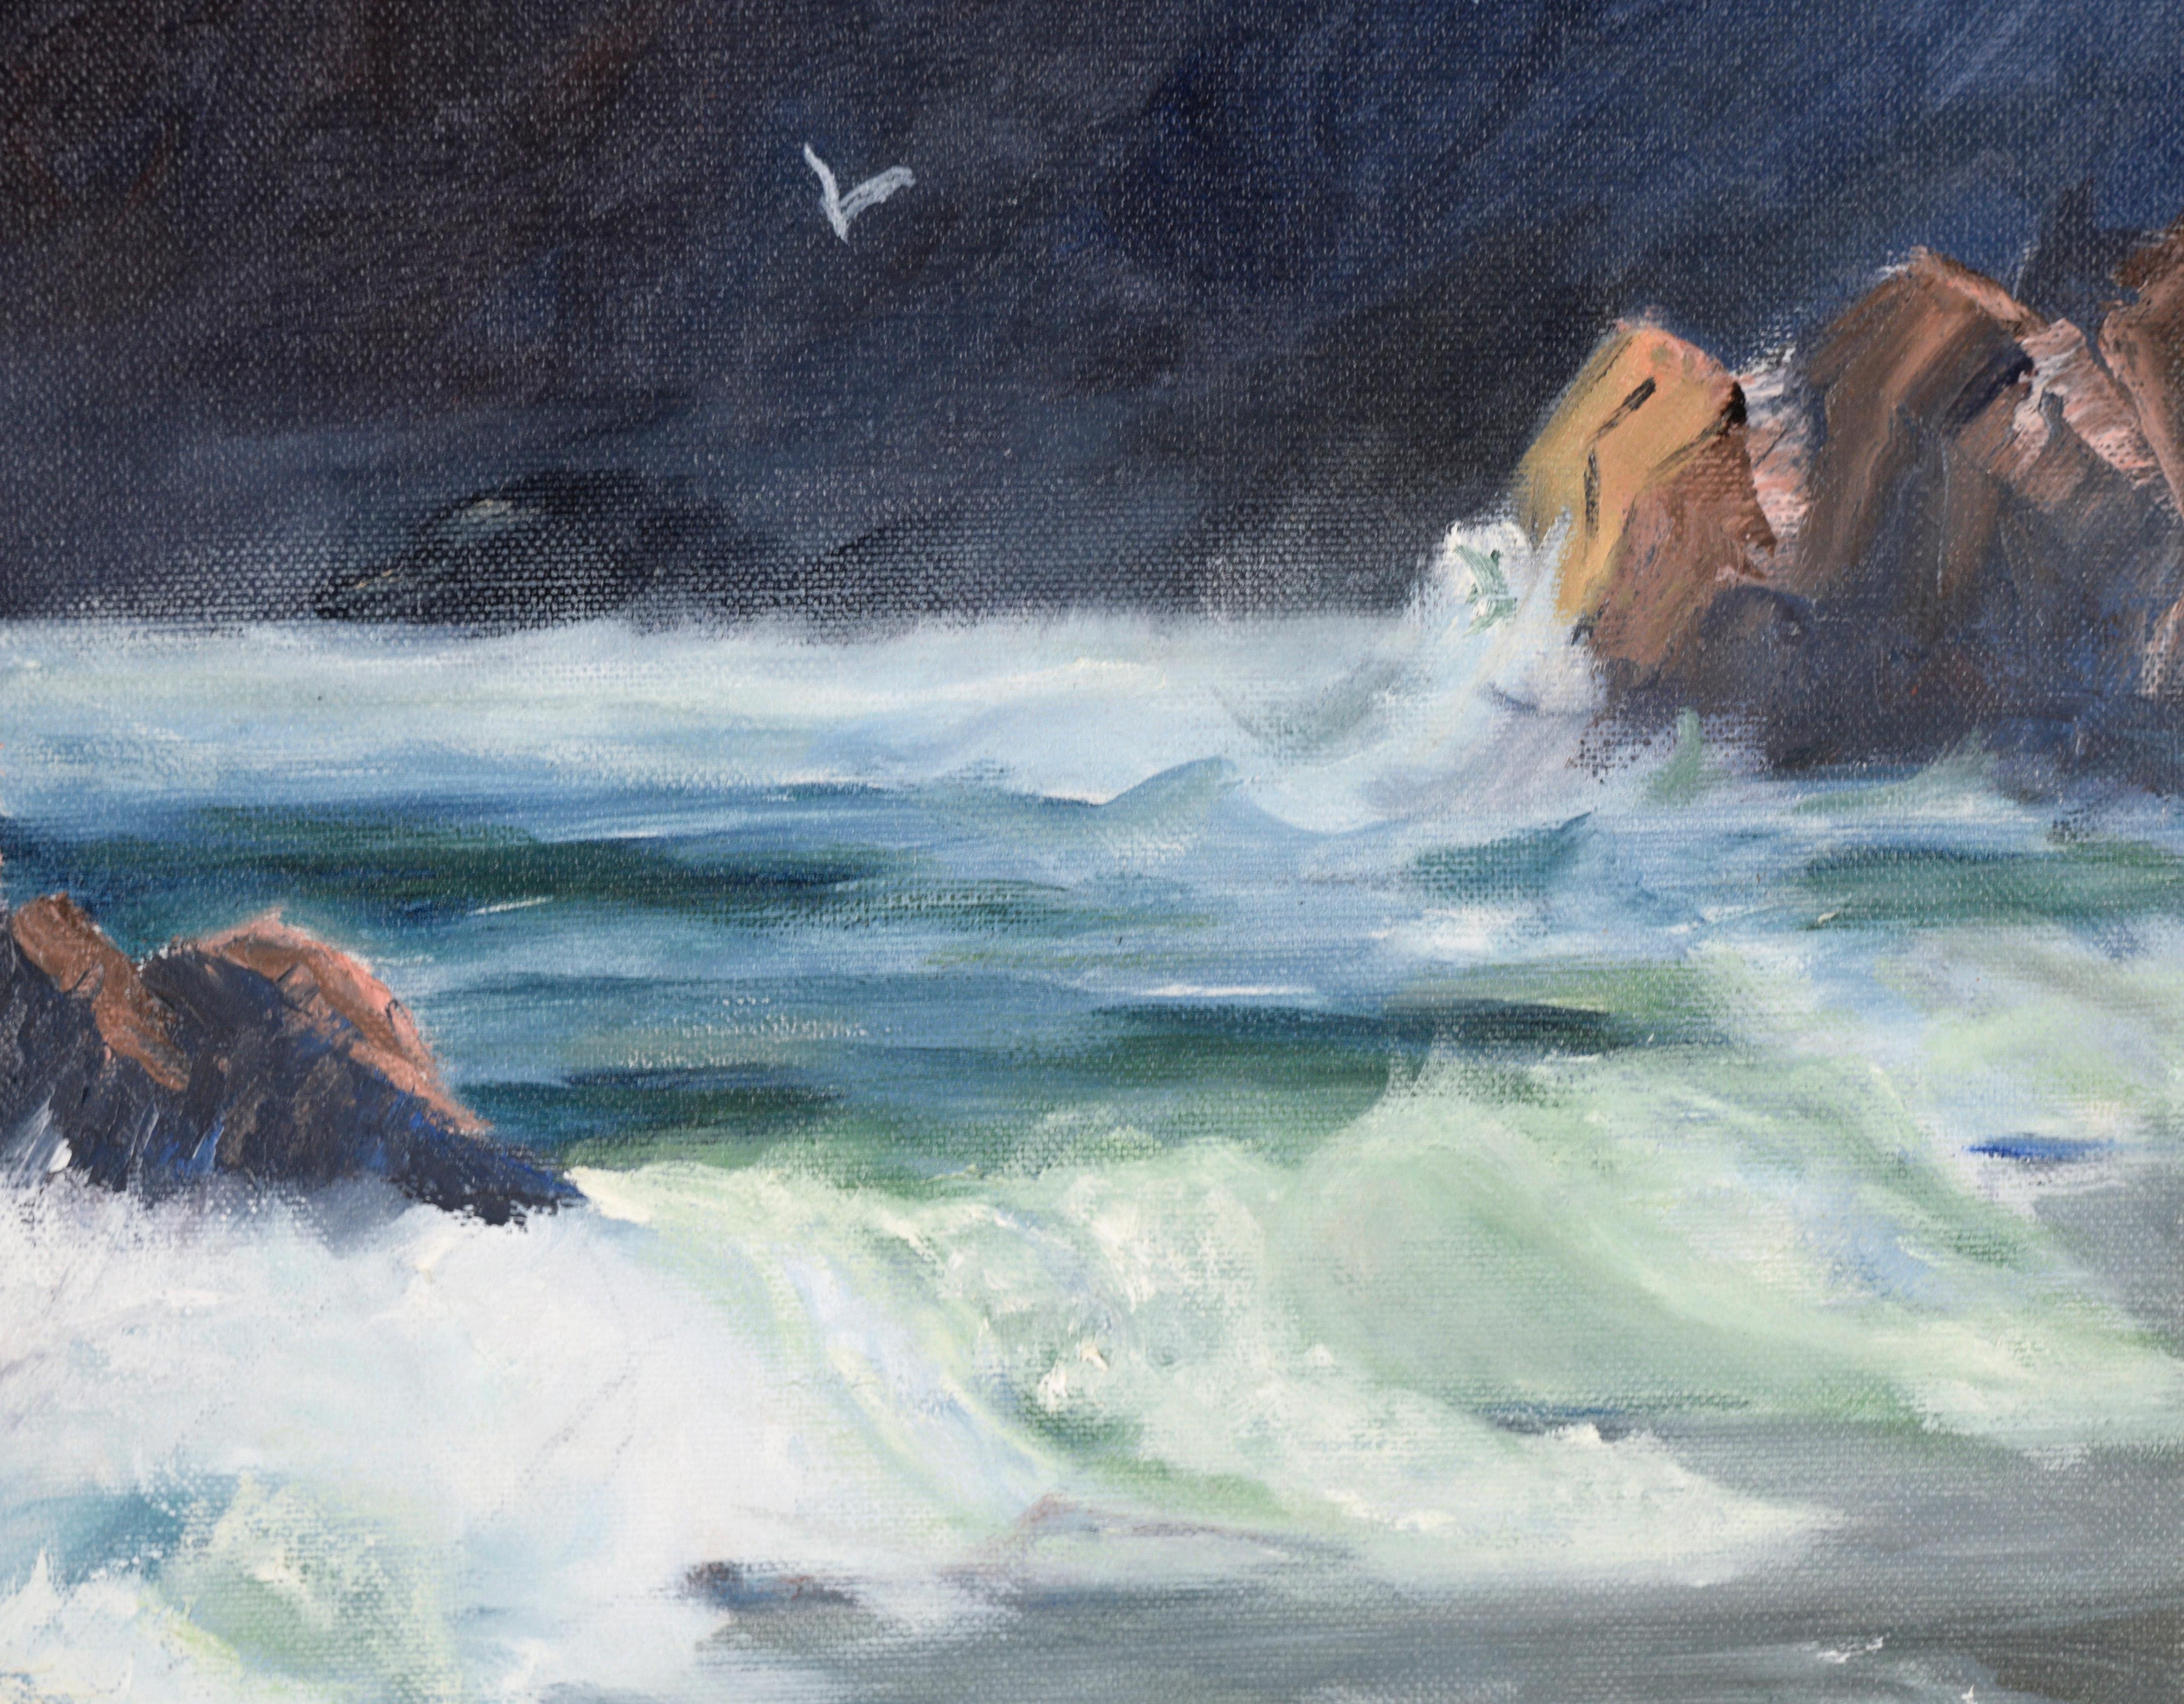 Pacific Coastal Seascape in Oil on Canvas

Dynamic seascape by Evelyn Webb Meck (American, 1915-2011). Waves are crashing in around large rocks that are just offshore. In the background, a large cliff stretches across the composition, creating a